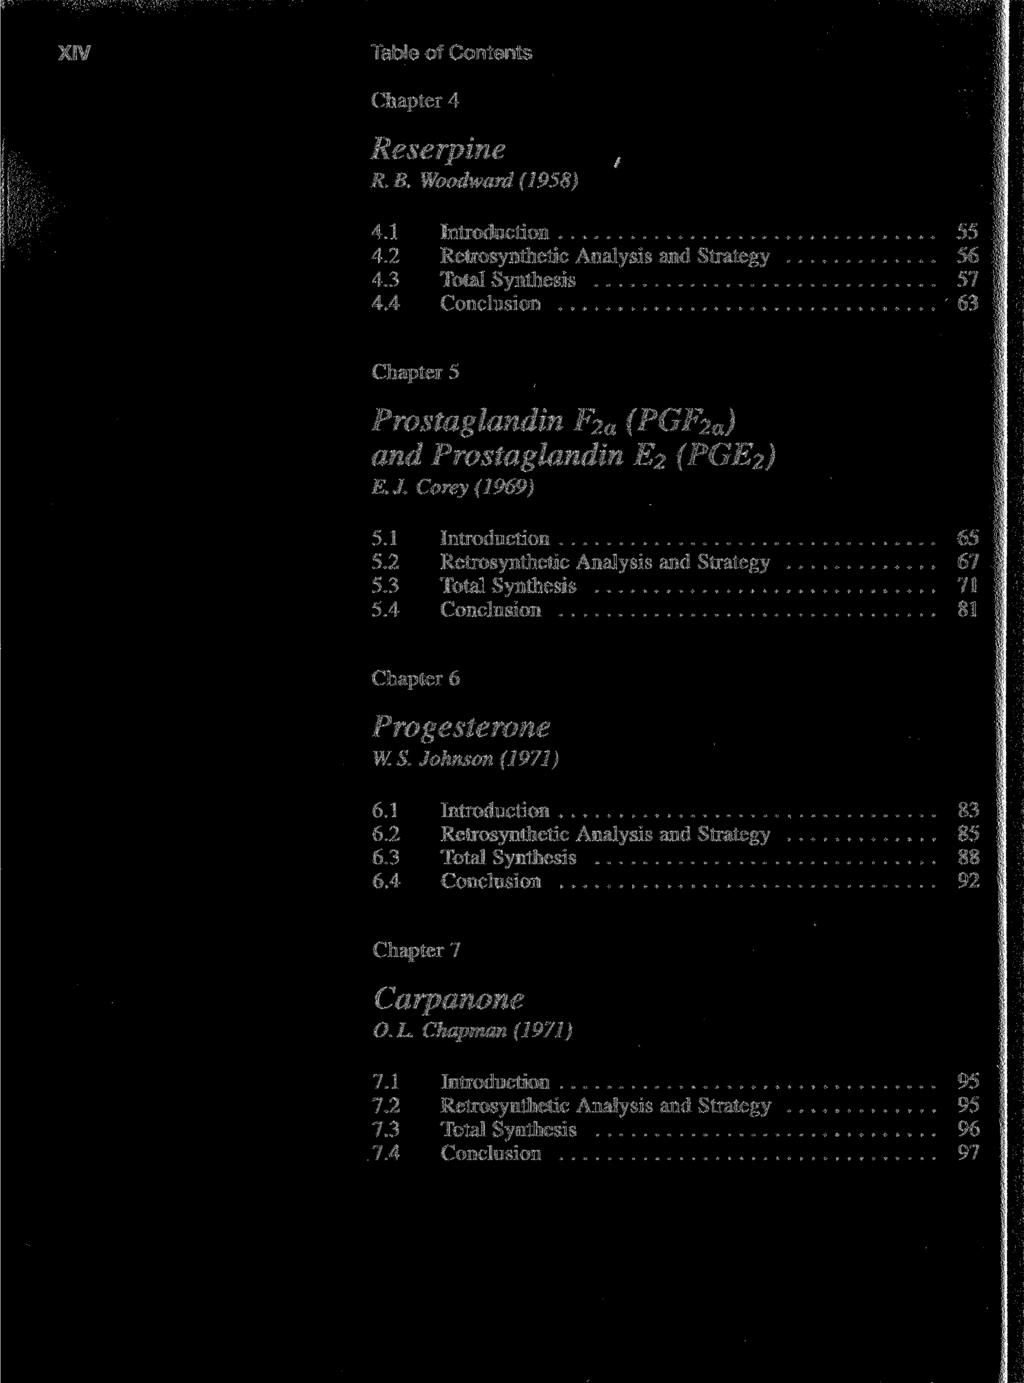 XIV Table of Contents Chapter 4 Res erpine ( R. B. Woodward (1958) 4.1 Introduction 55 4.2 Retrosynthetic Analysis and Strategy 56 4.3 Total Synthesis 57 4.